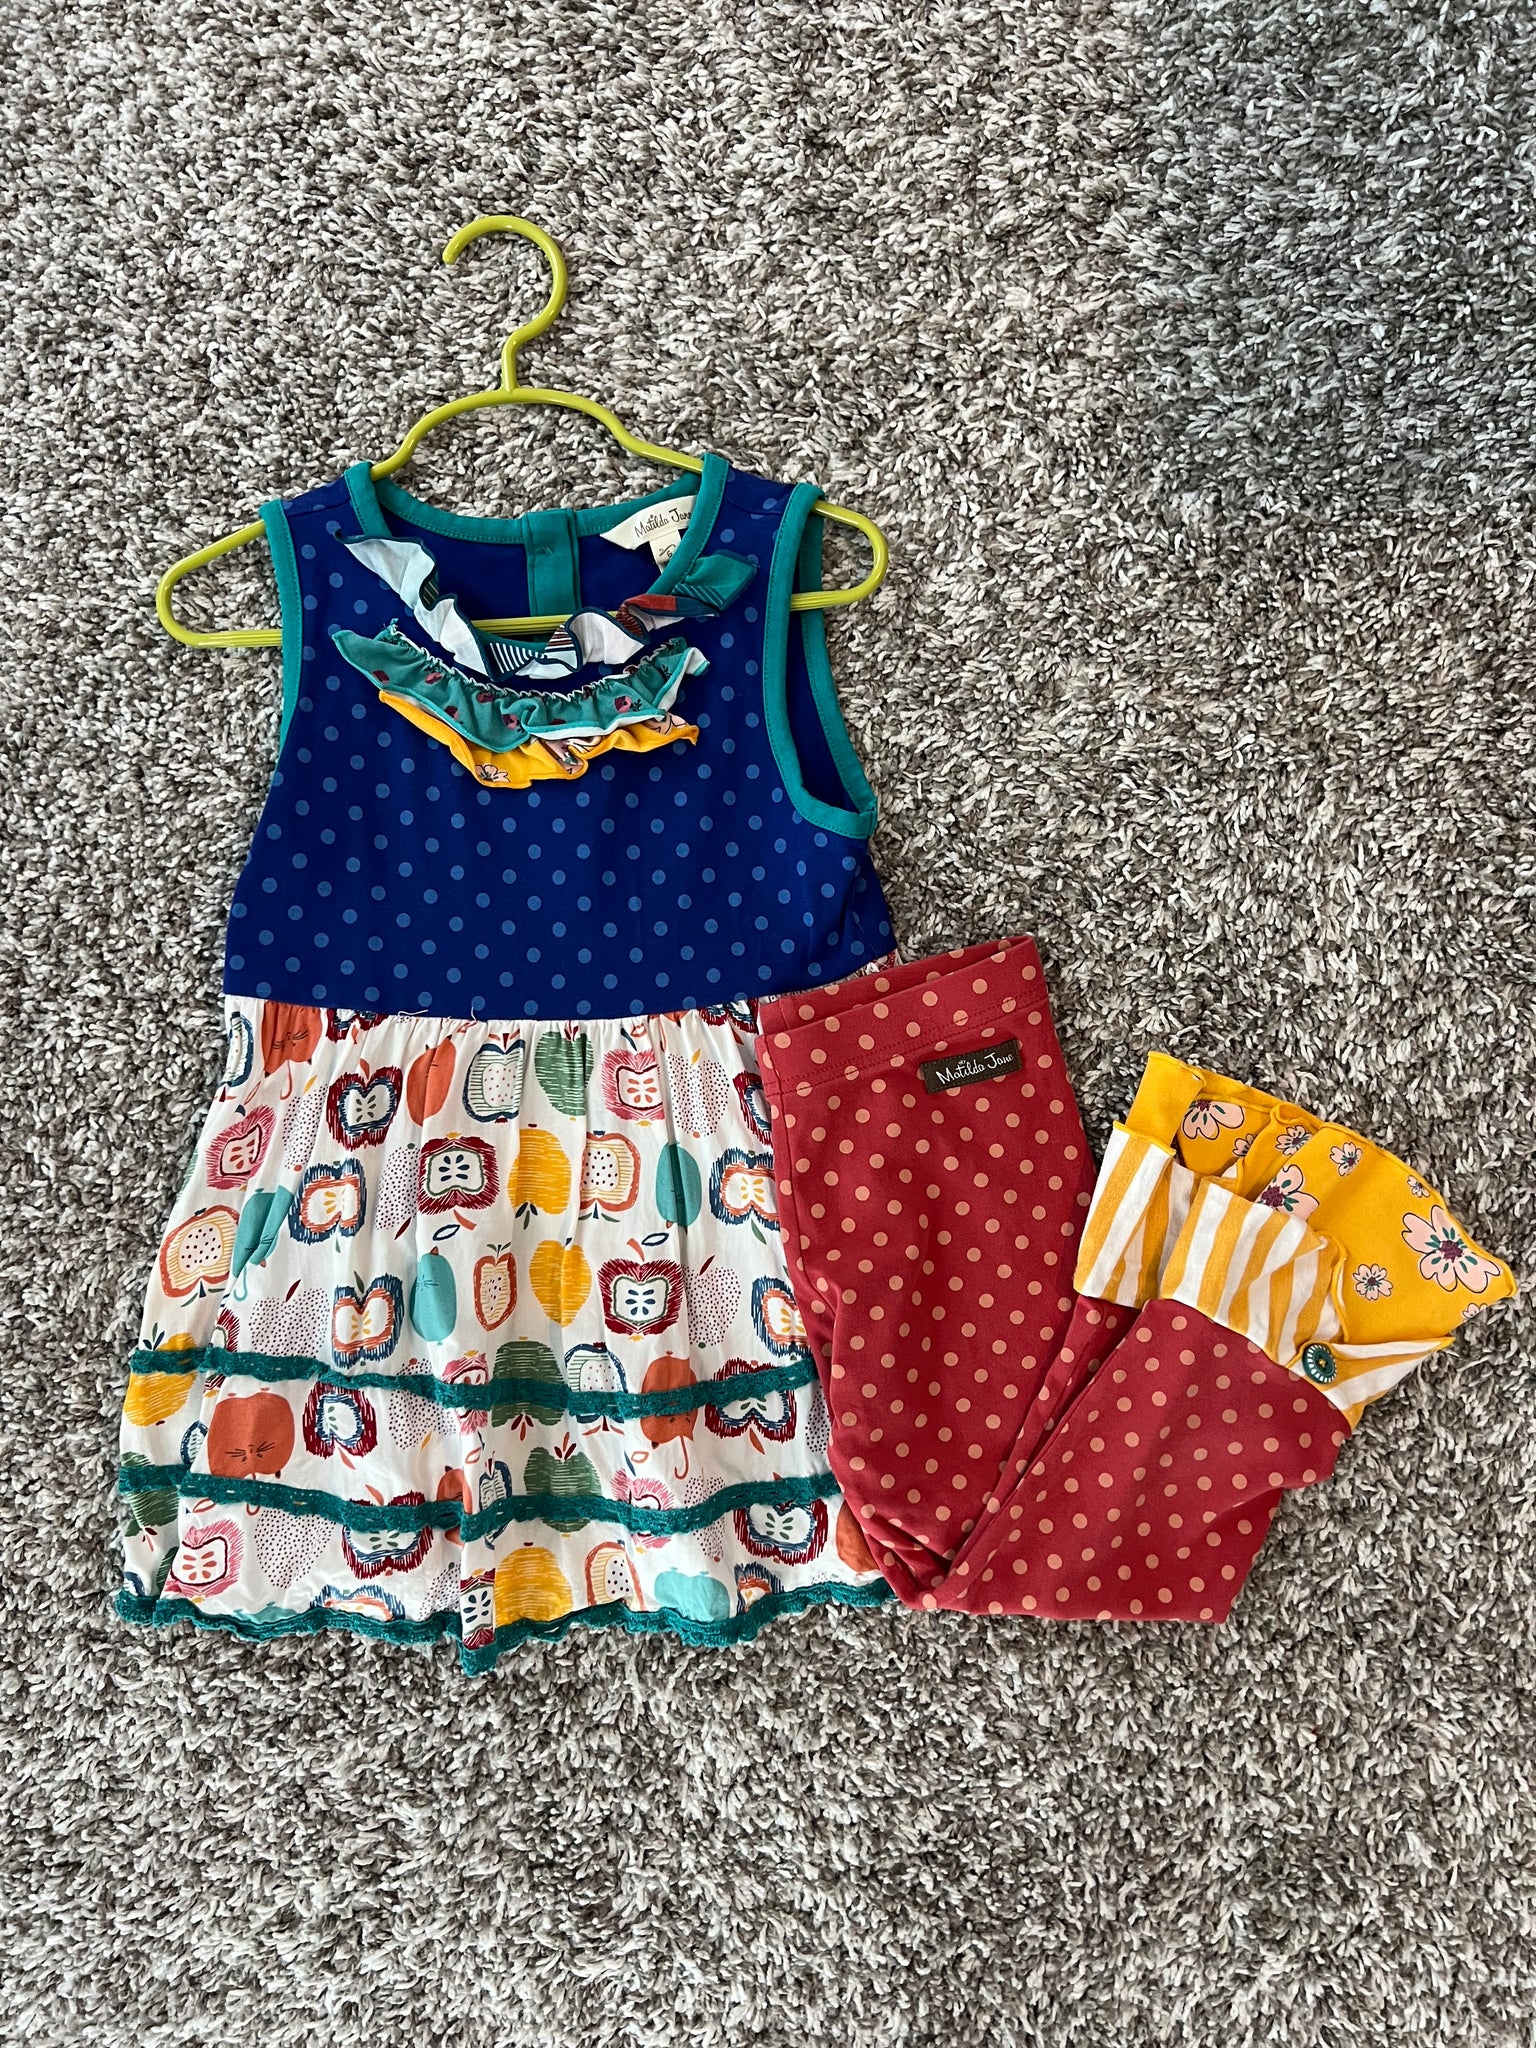 Matilda Jane Apple Top and Matching Scrappy Leggings Size 6